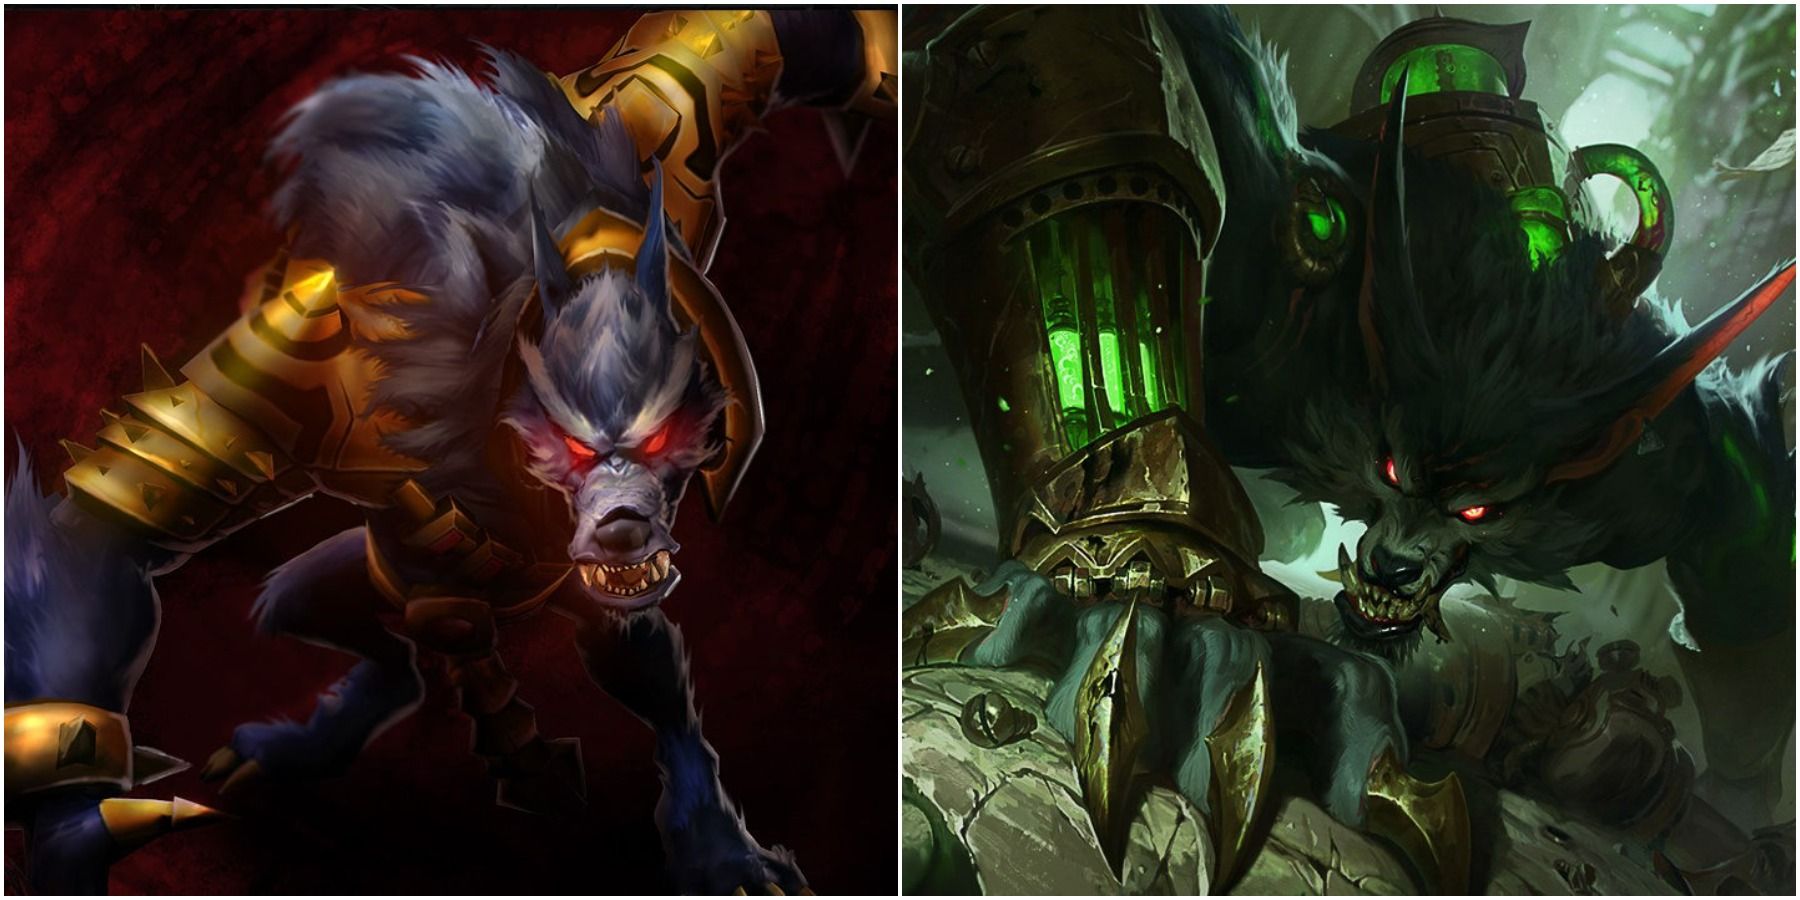 Warwick Hunting In His Old & Current Classic League of Legends Skin